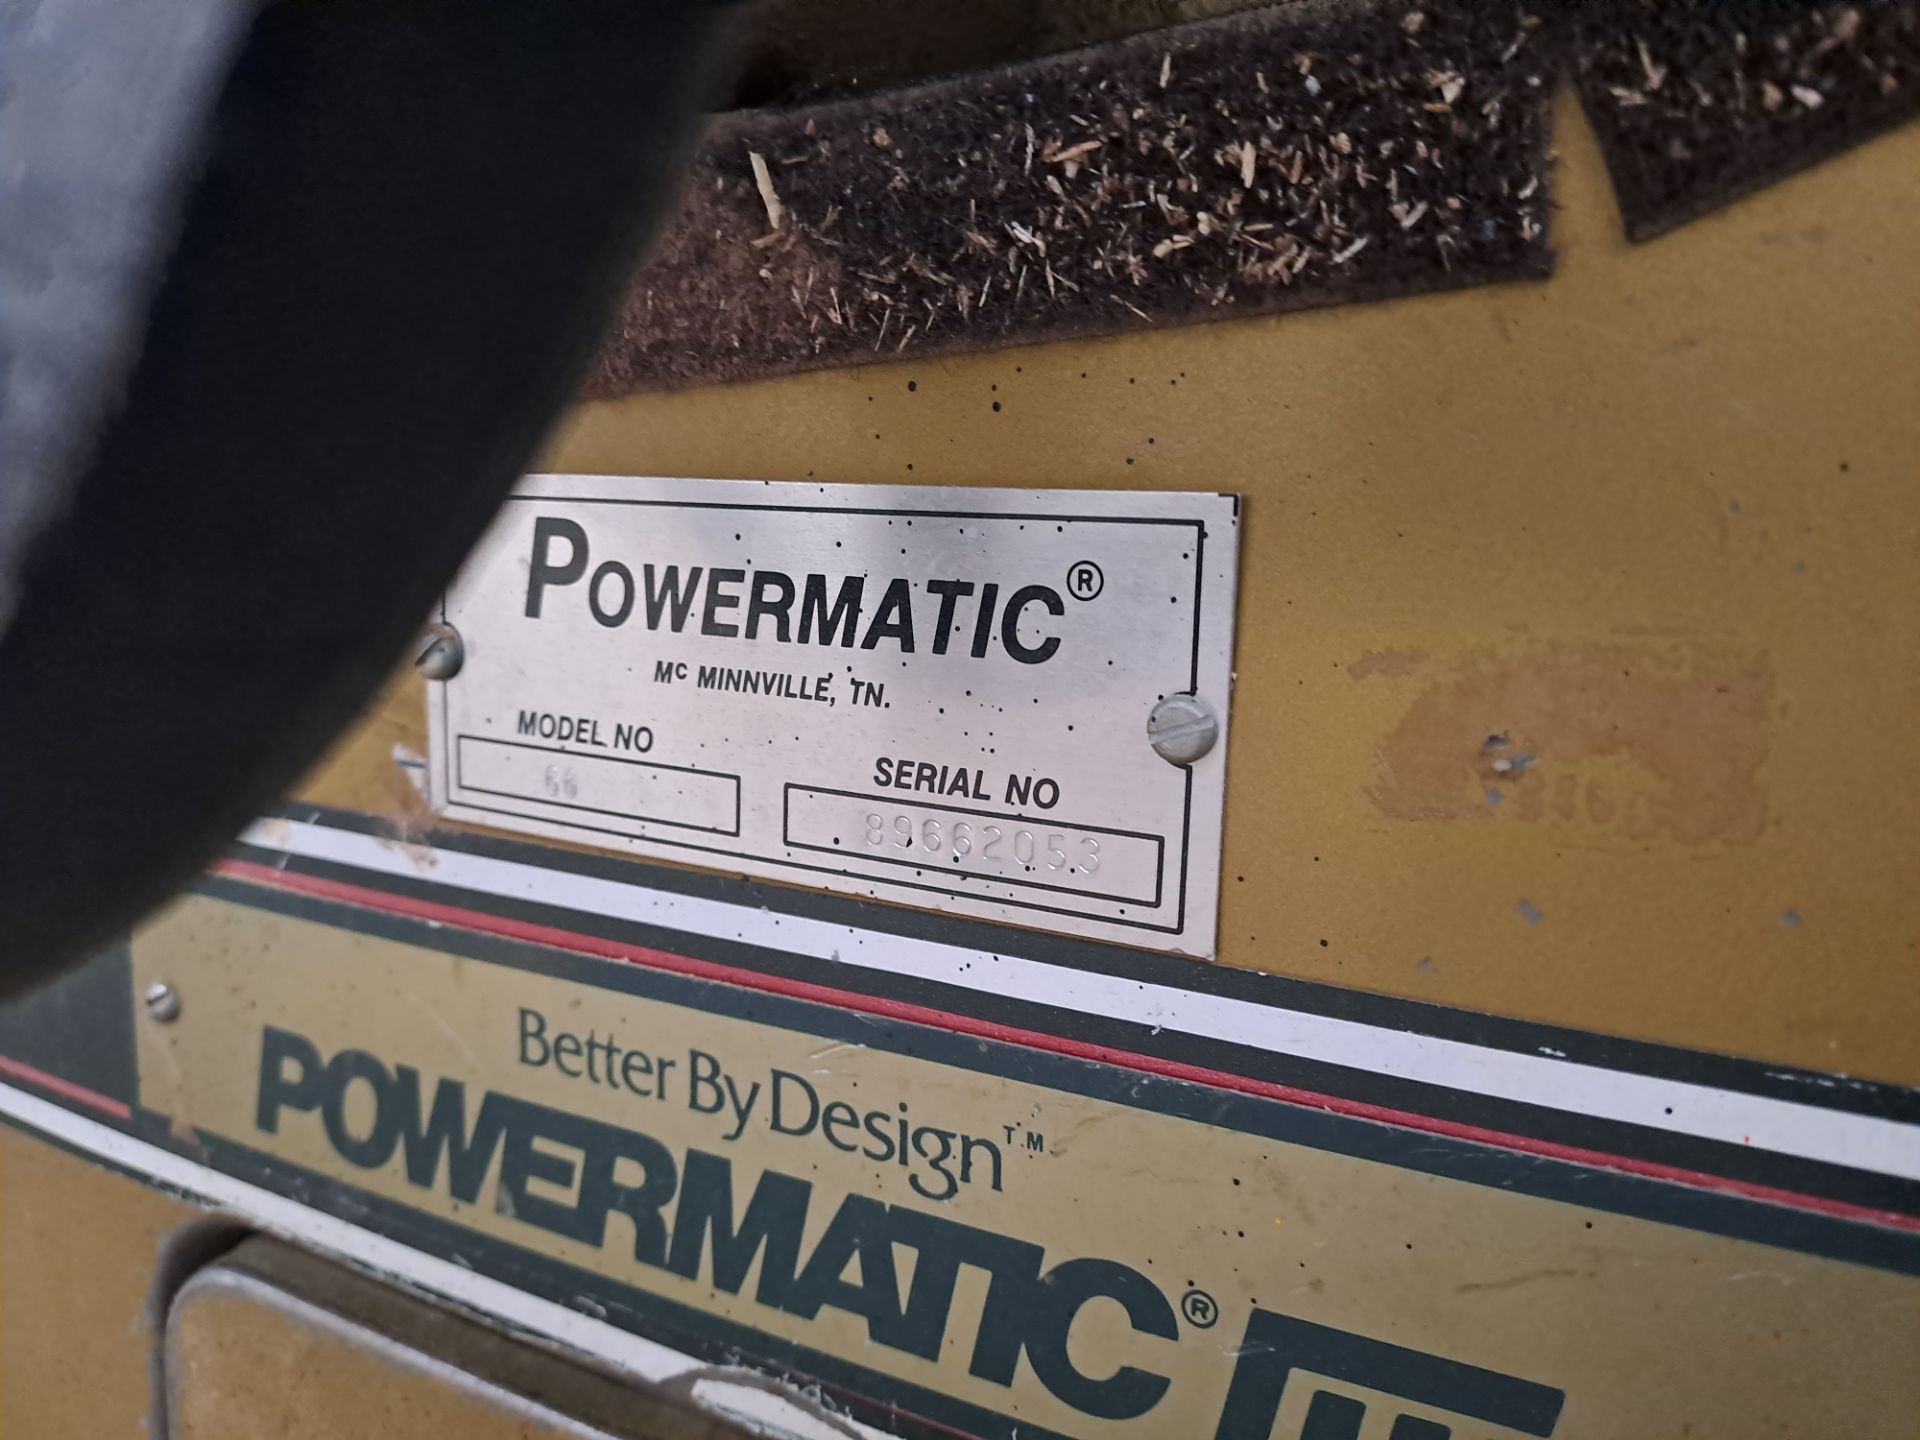 Table saw with Powermatic feeder, Model 66, Serial No. 89662053, 230/460V, With 7.5 hp motor; Inclu - Image 12 of 15